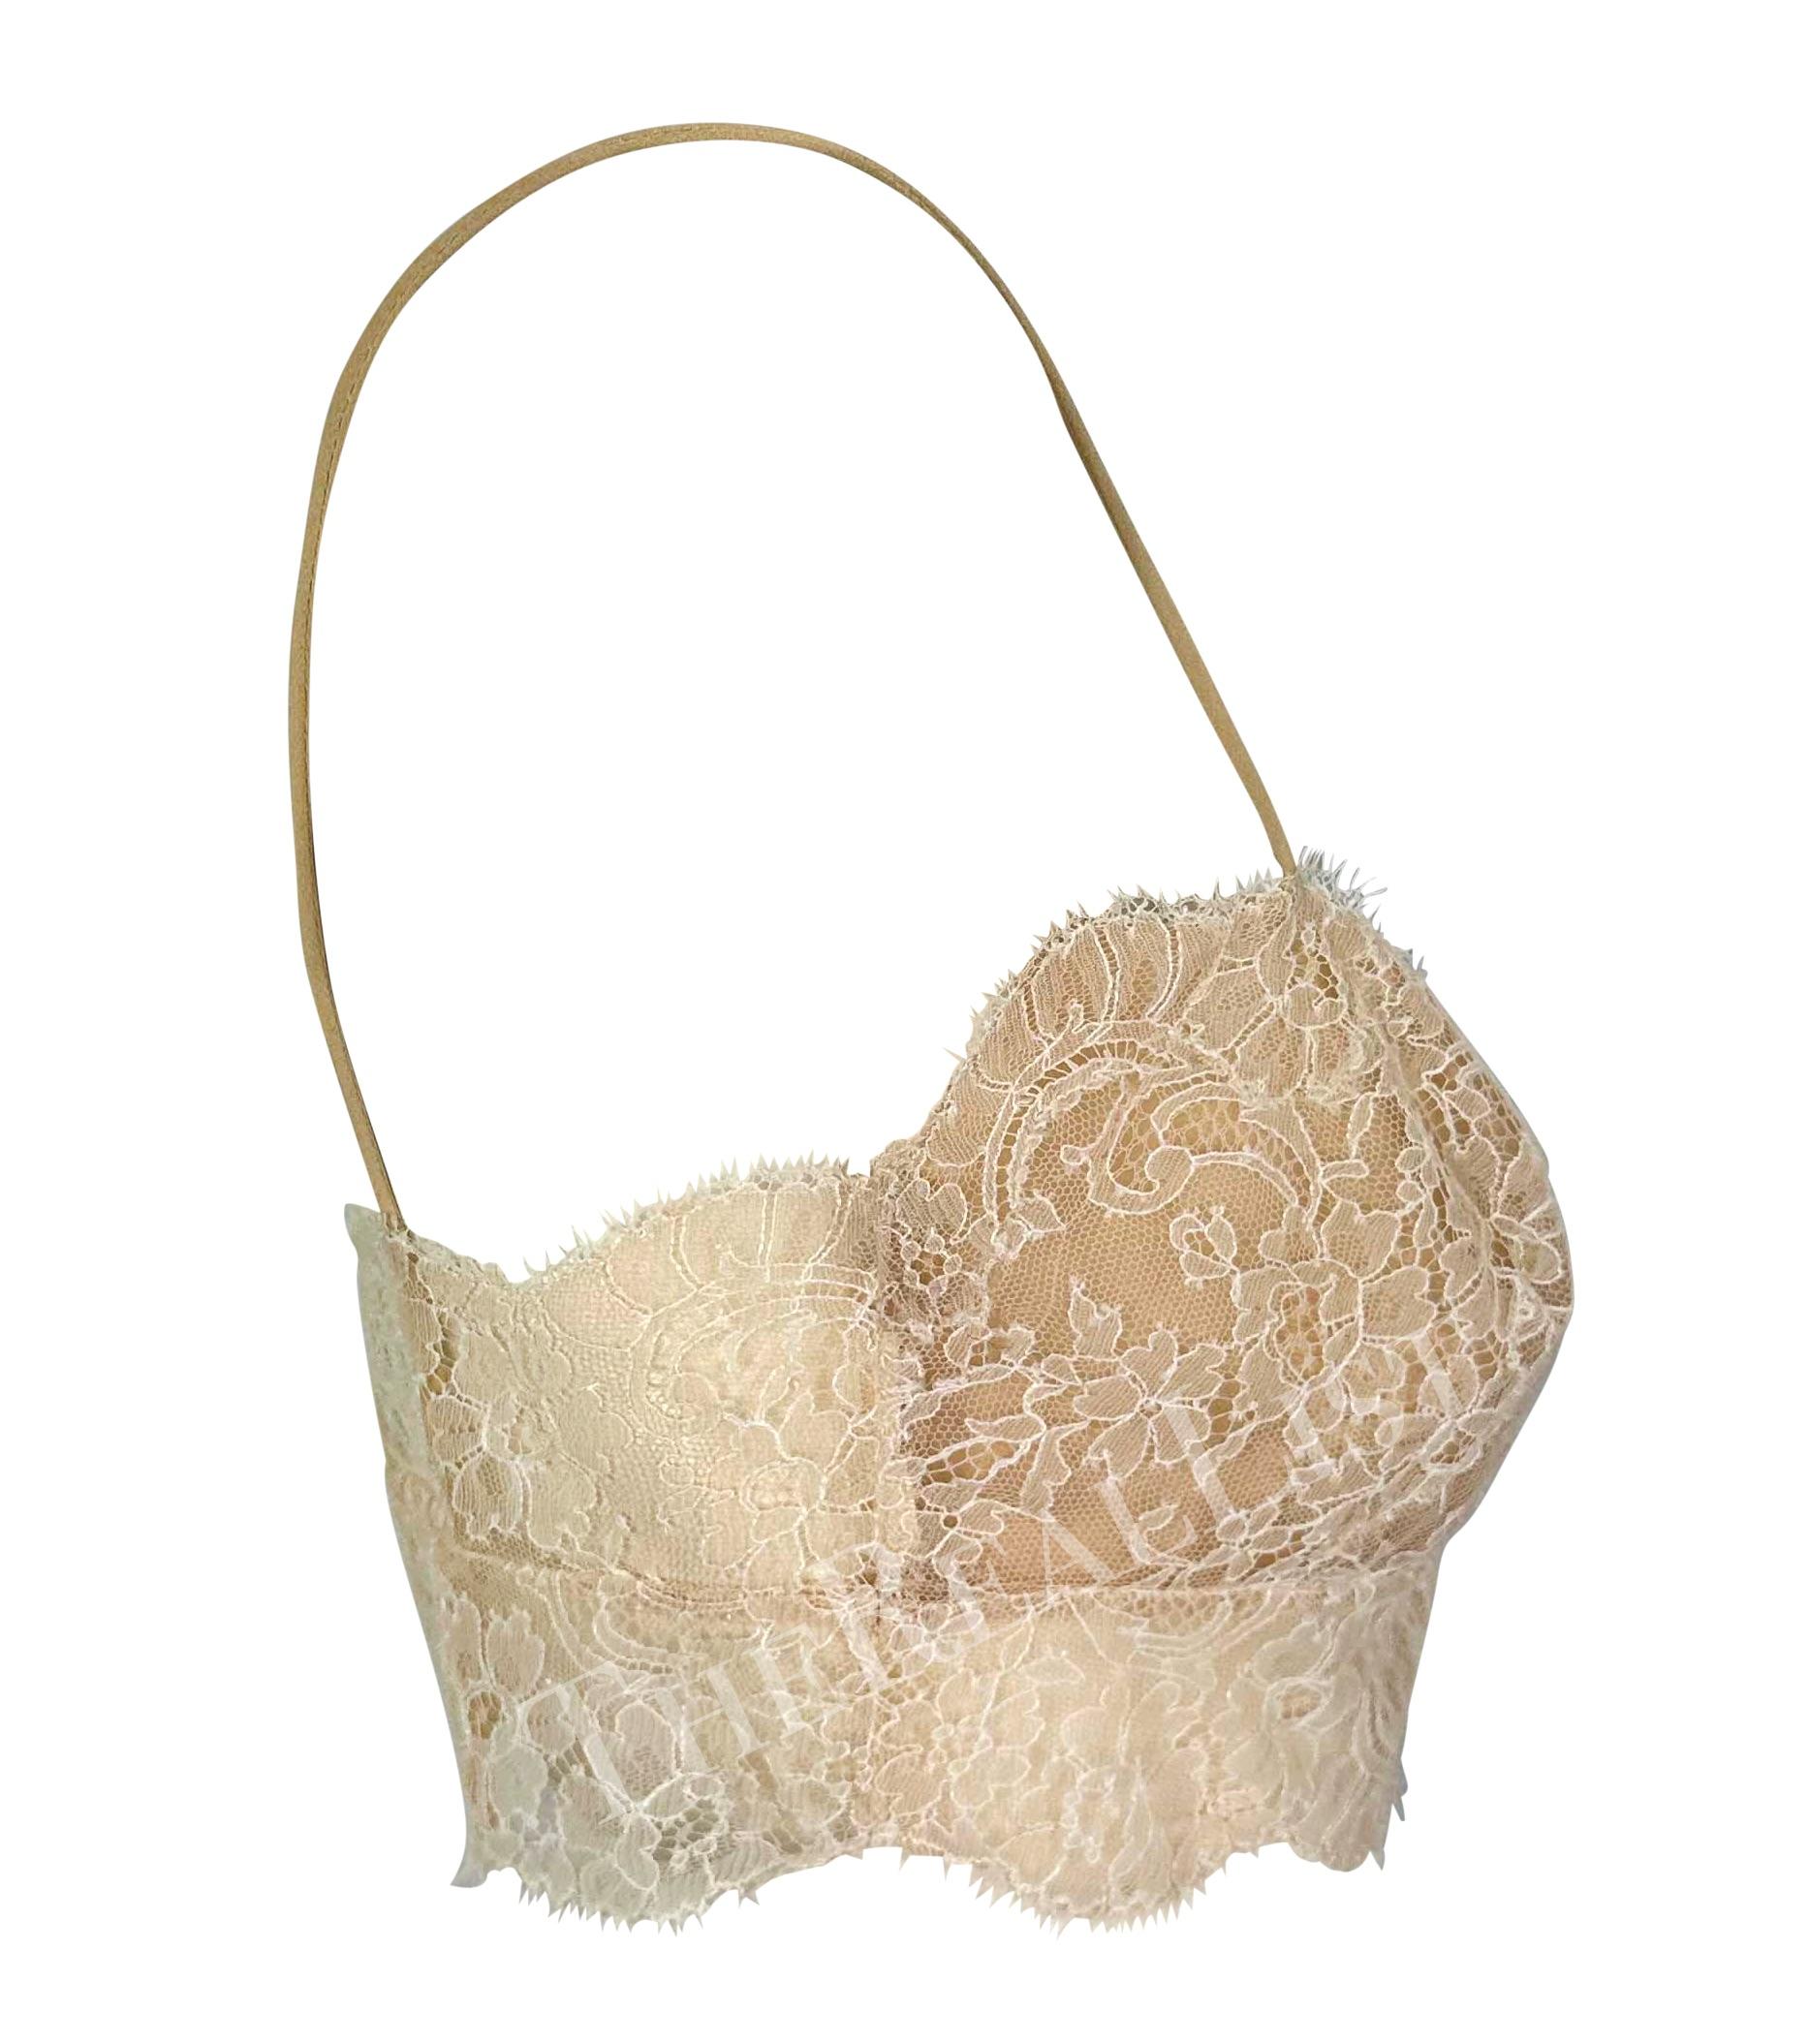 S/S 2000 Valentino Garavani Tan Cream Sheer Lace Bralette Crop Top Y2K In Good Condition For Sale In West Hollywood, CA